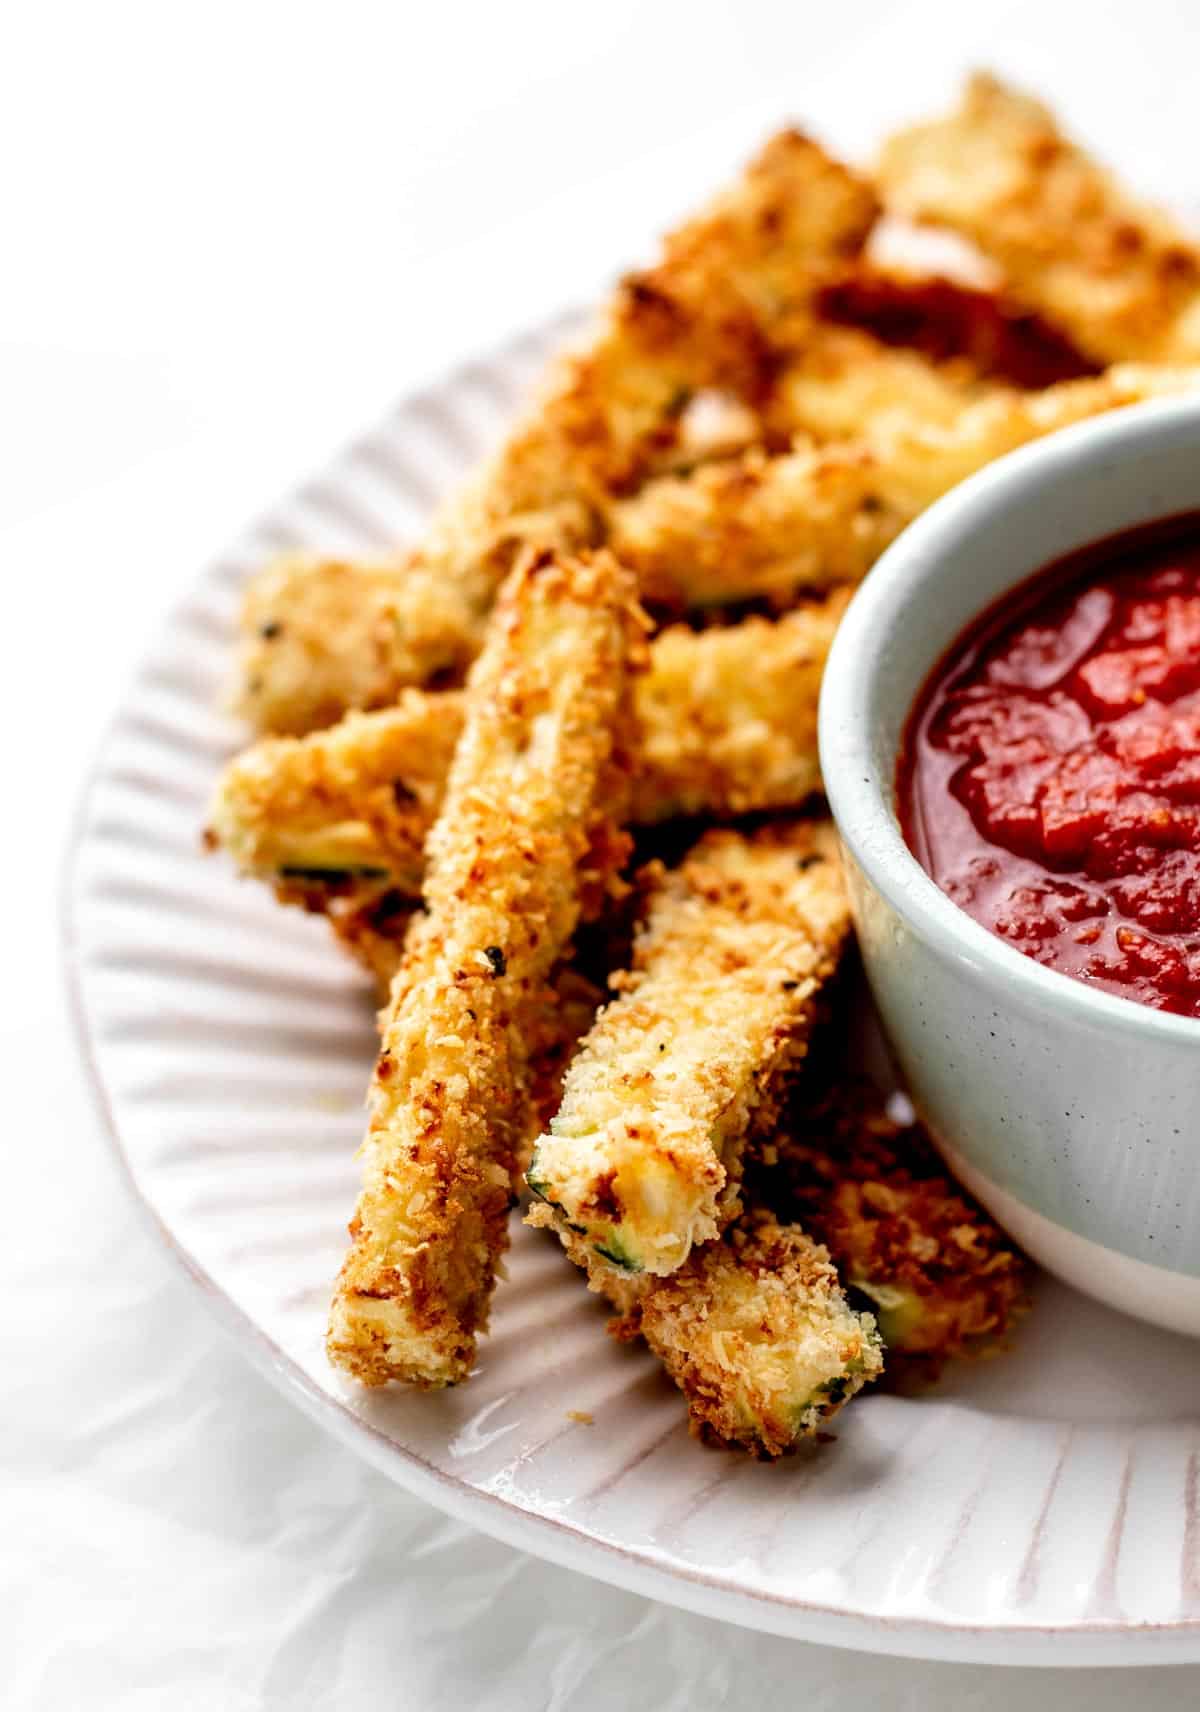 A close up image of a the crispy air fryer zucchini fries on a plate.